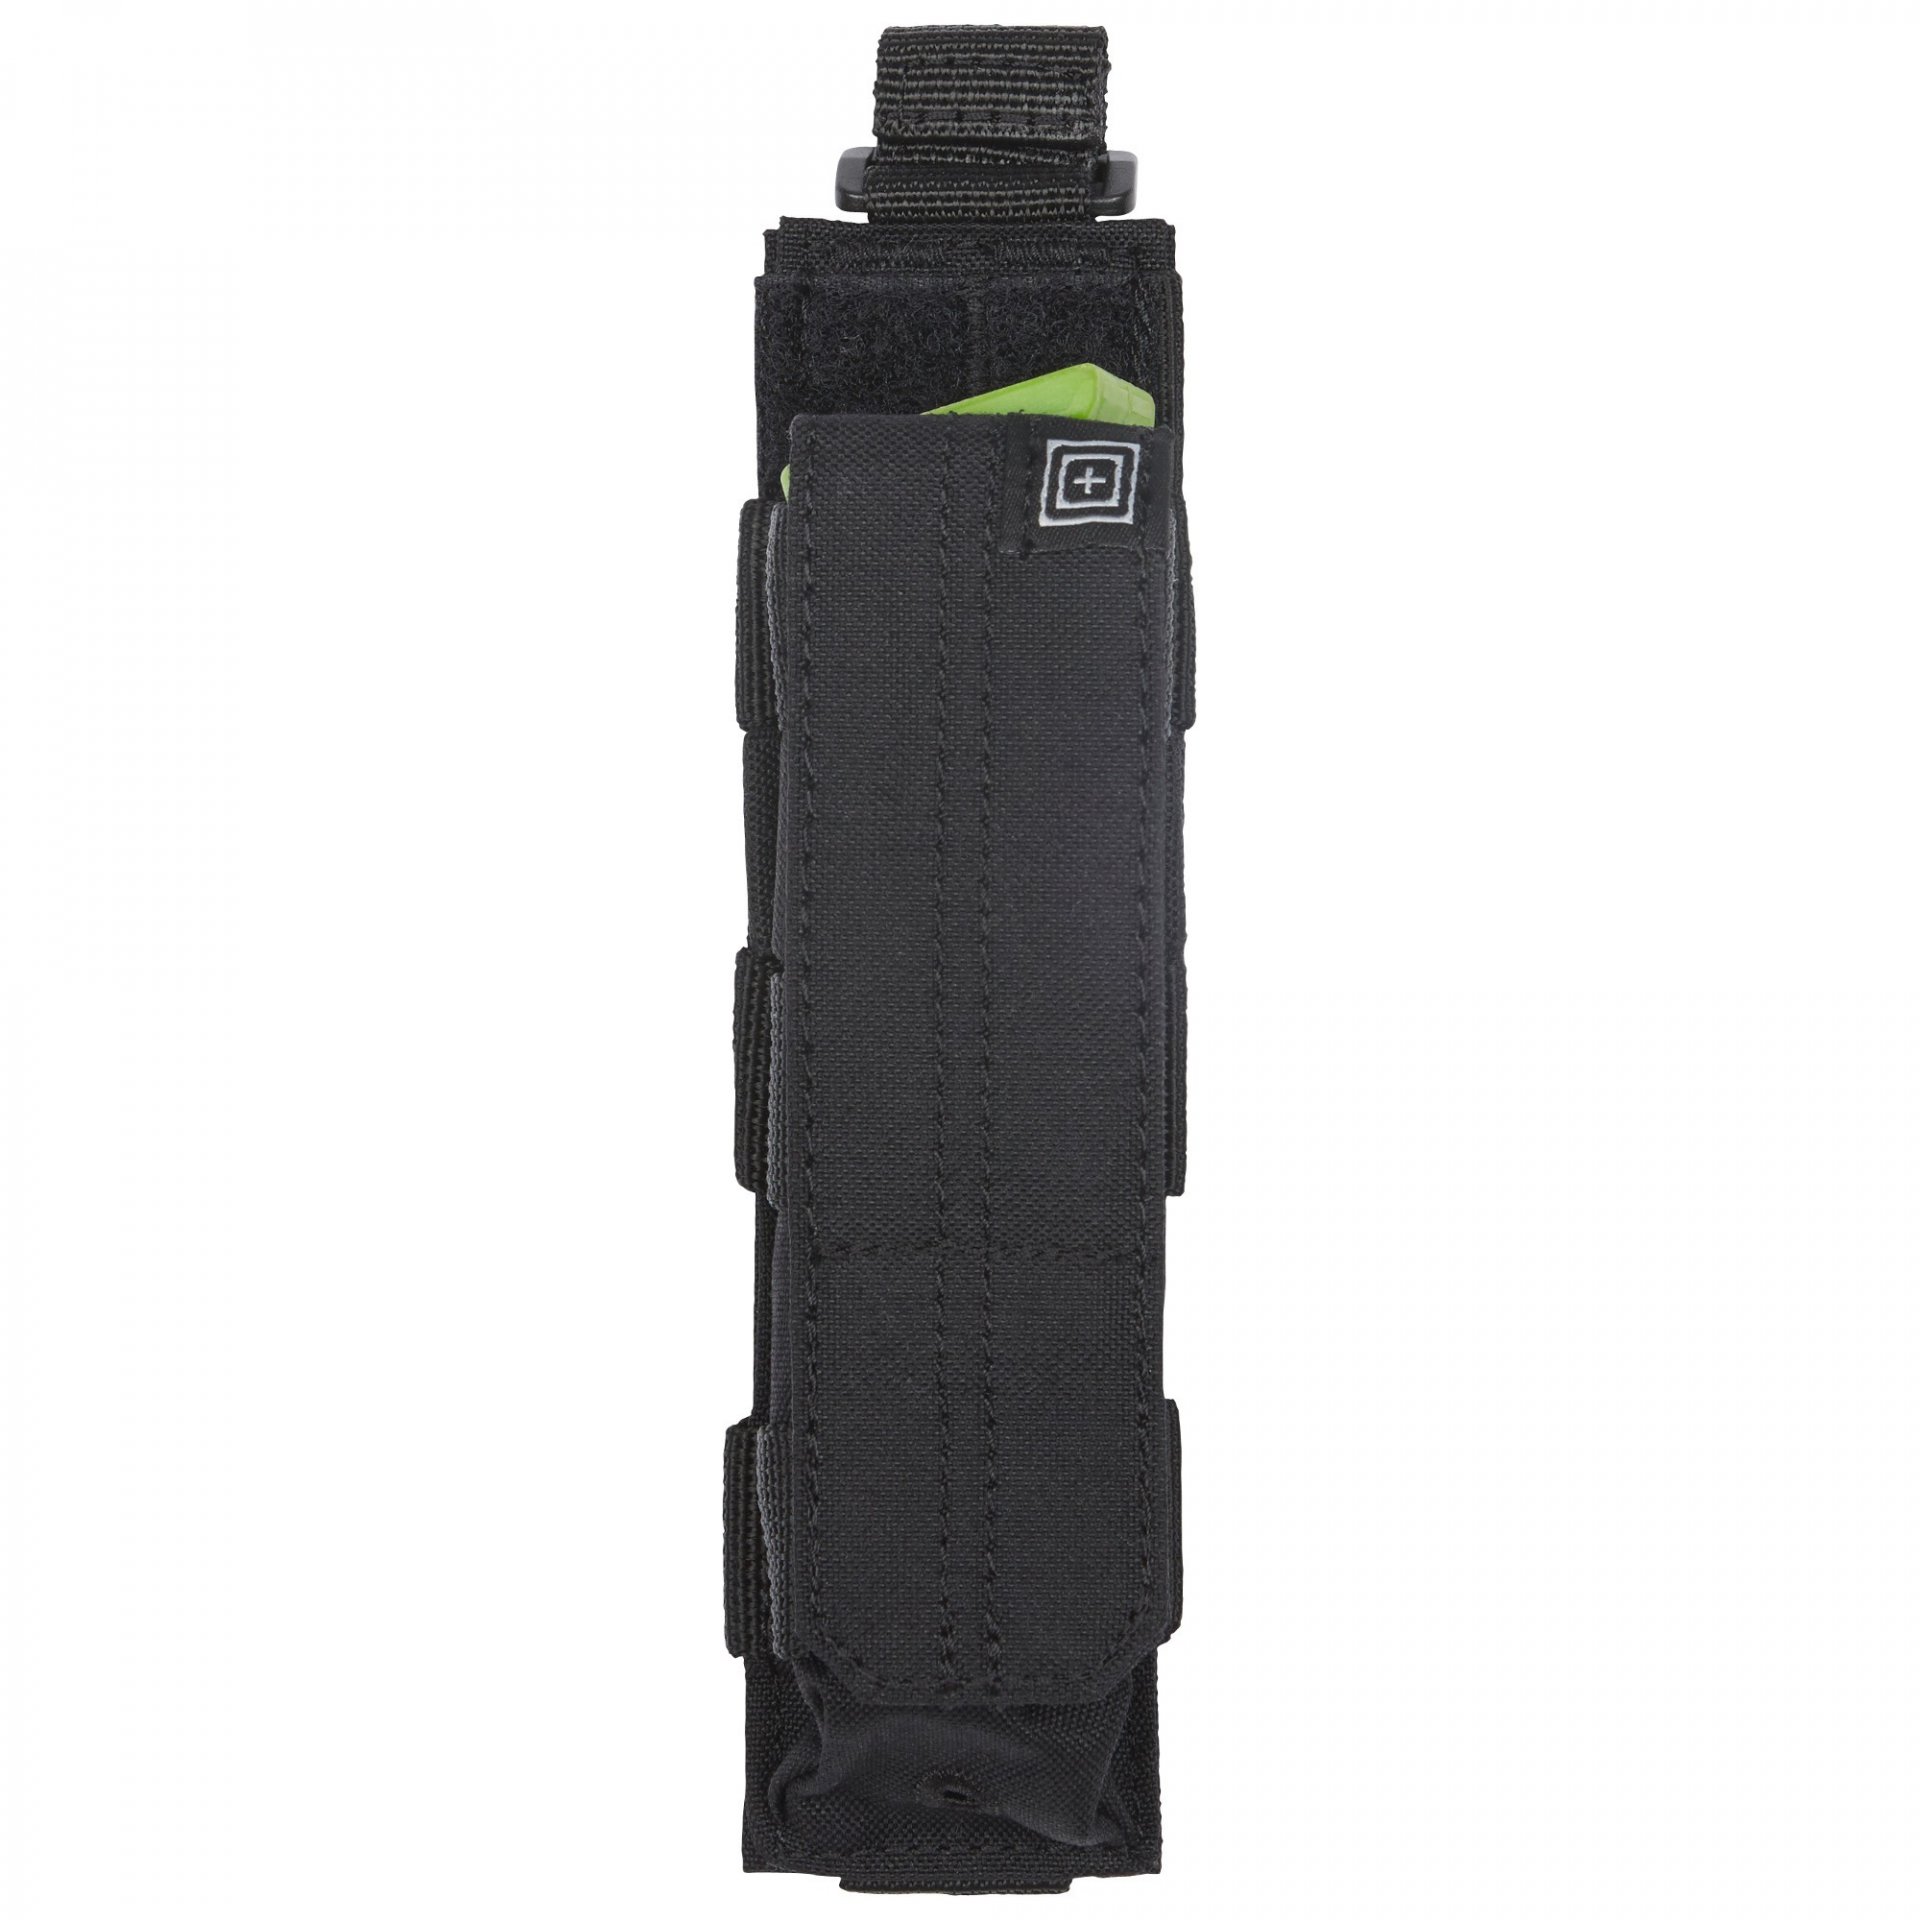 5.11 Tactical MP5 Bungee/Cover Single 56160